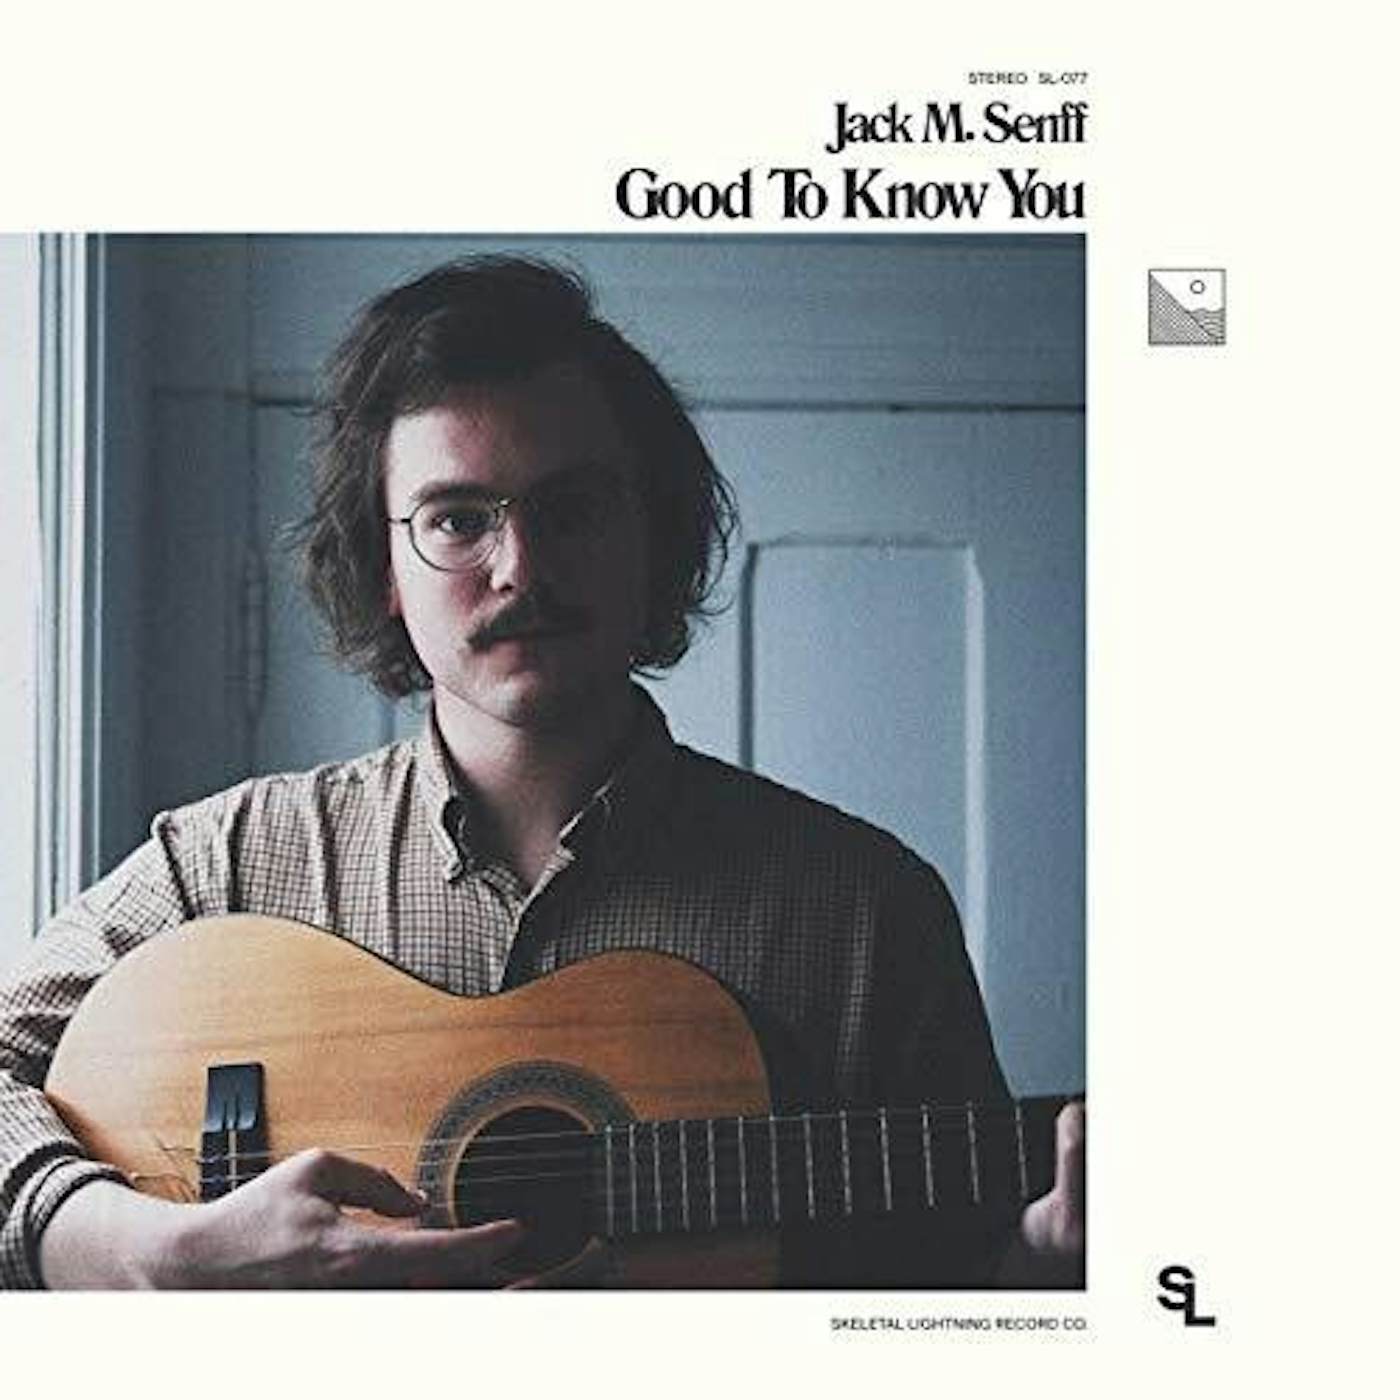 Jack M. Senff Good to Know You Vinyl Record